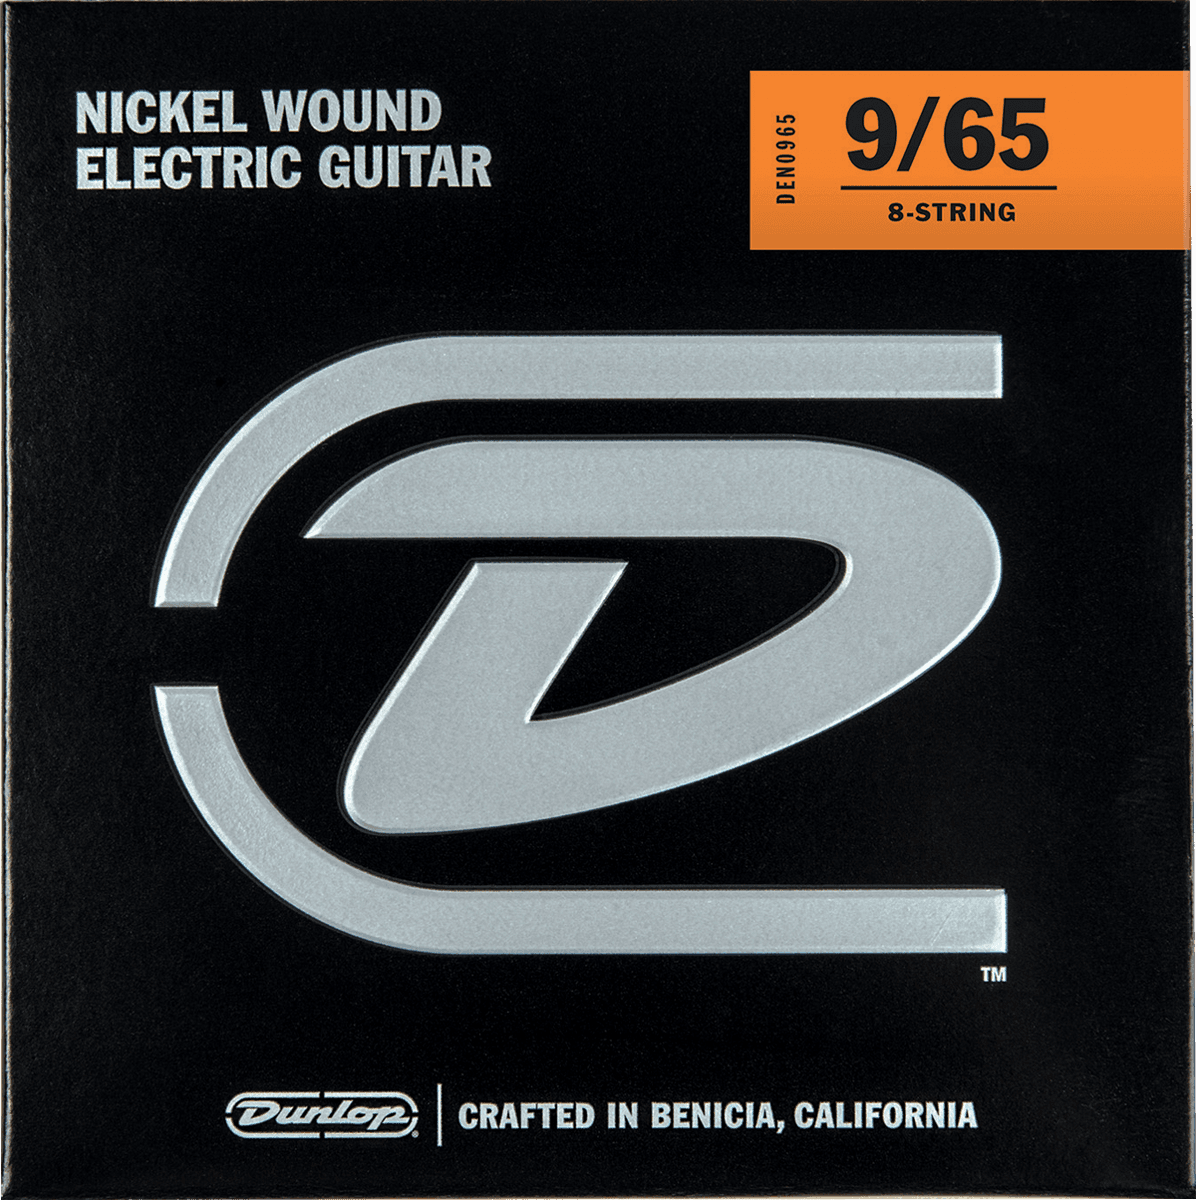 Jim Dunlop Den0965 8-string Performance+ Nickel Wound Electrique Guitar 8c Extra Light 9-65 - Electric guitar strings - Main picture